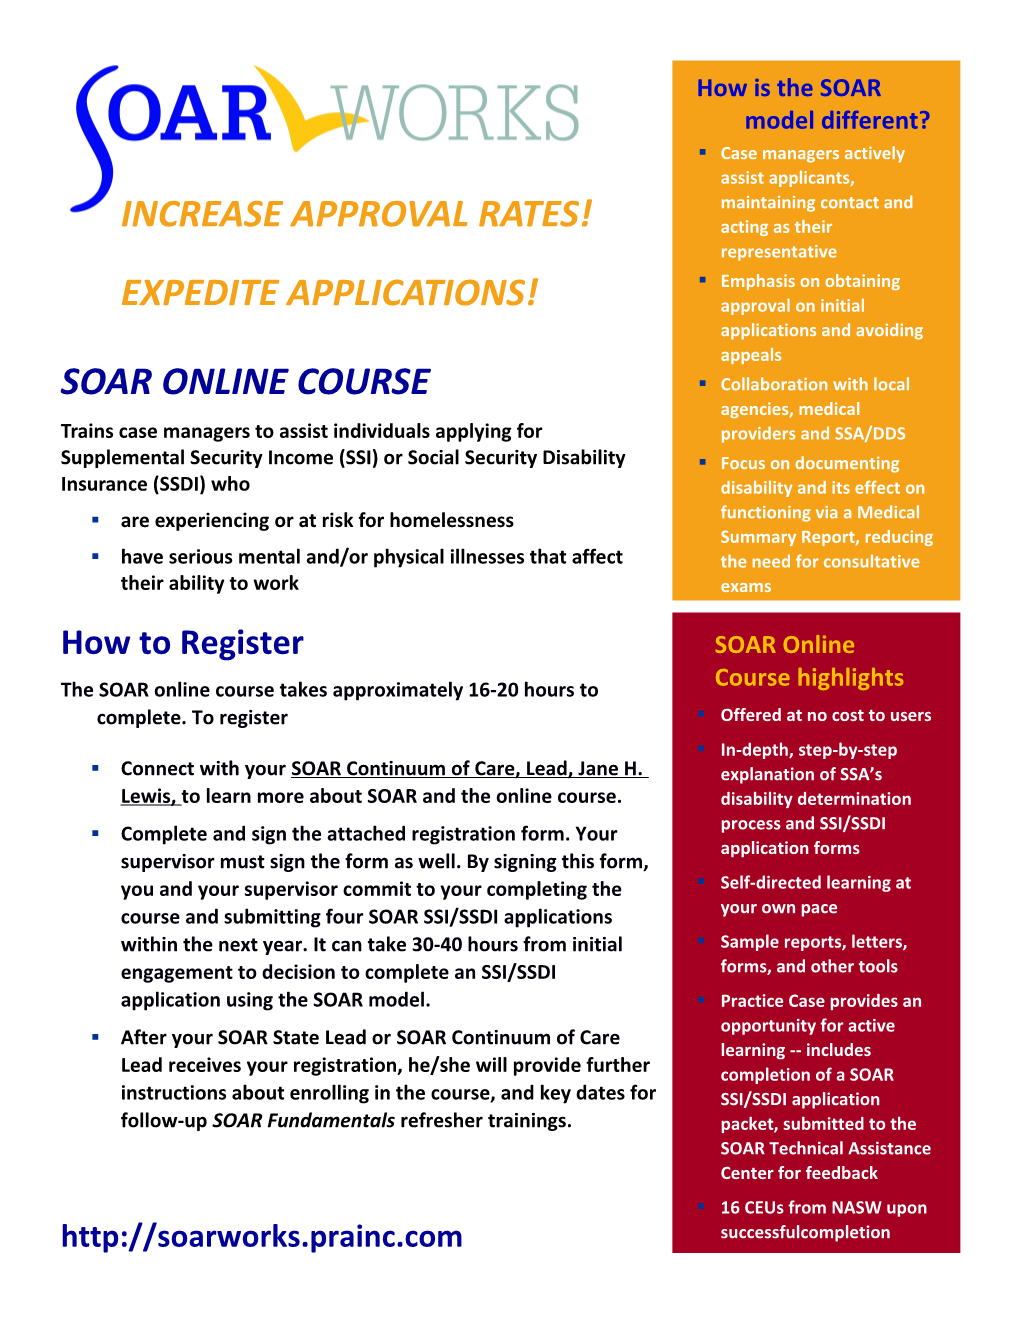 The SOAR Online Course Takes Approximately 16-20 Hours to Complete. to Register